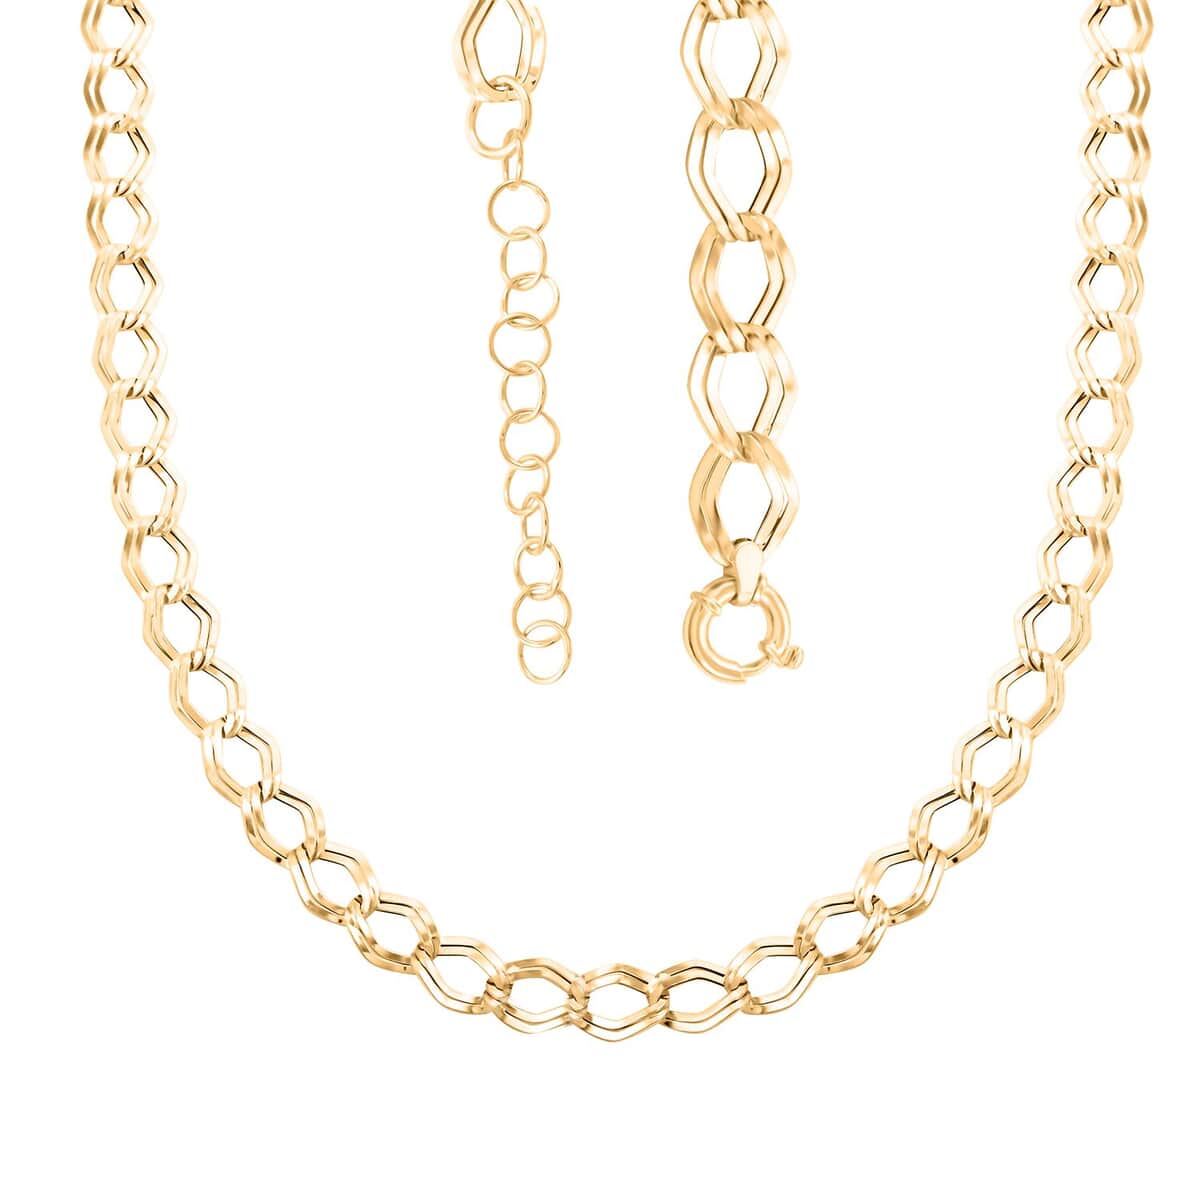 Gemella Italian 10K Yellow Gold Chain Necklace 18-20 Inches 6.77 Grams image number 3